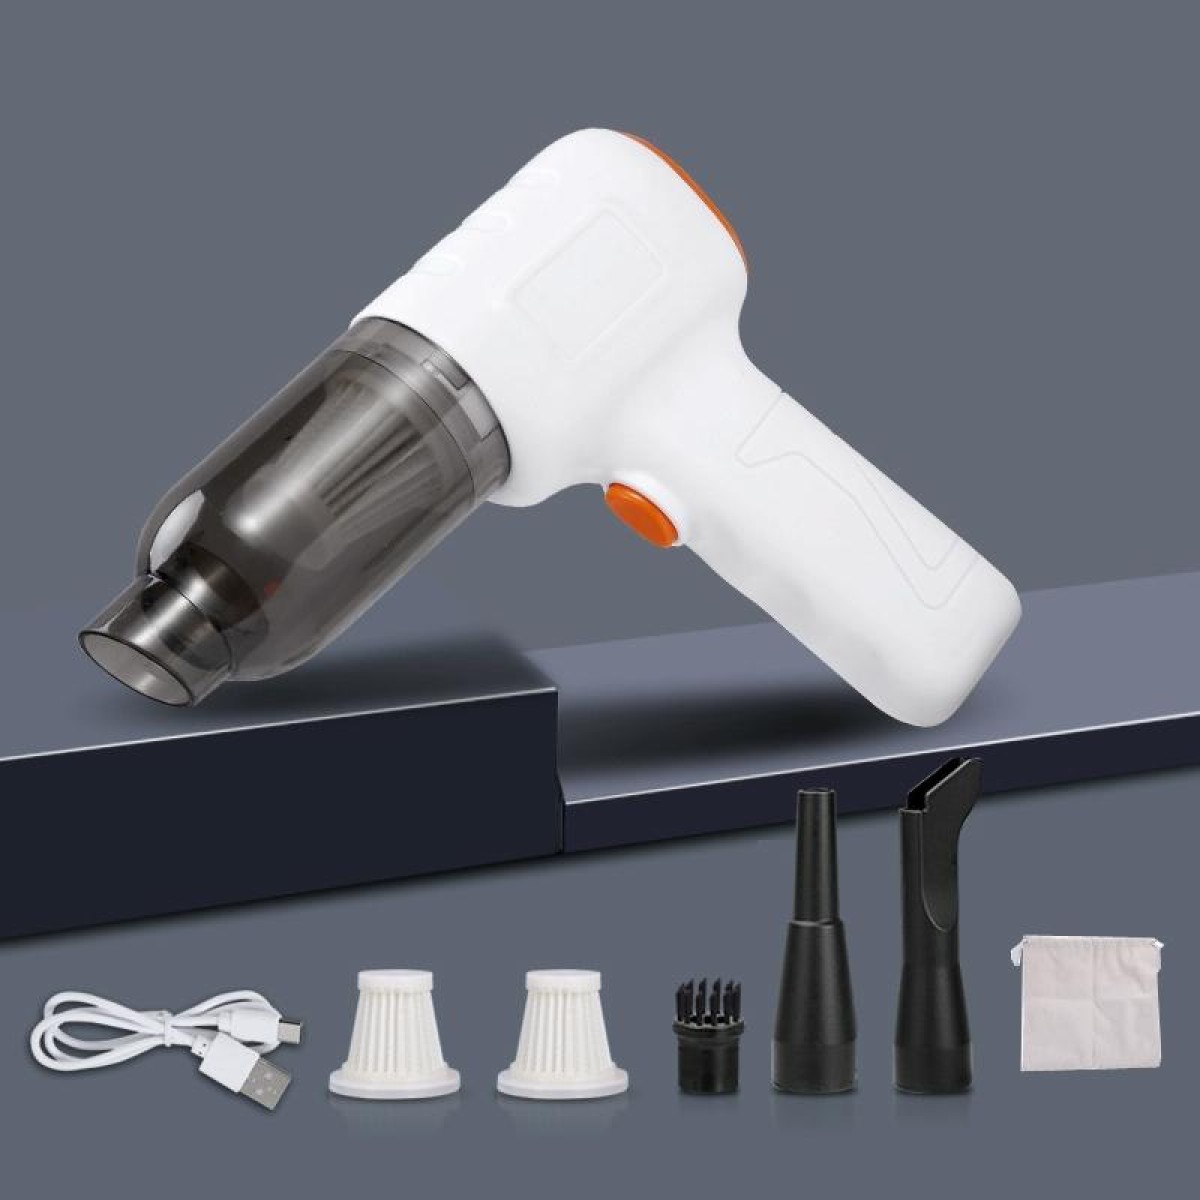 Car Vacuum Cleaner Large Suction Power Wireless Pump Inflatable Blower Handheld Small Vacuum Cleaner, Style: Brush 200W+2 Filters+Storage Bag (White)